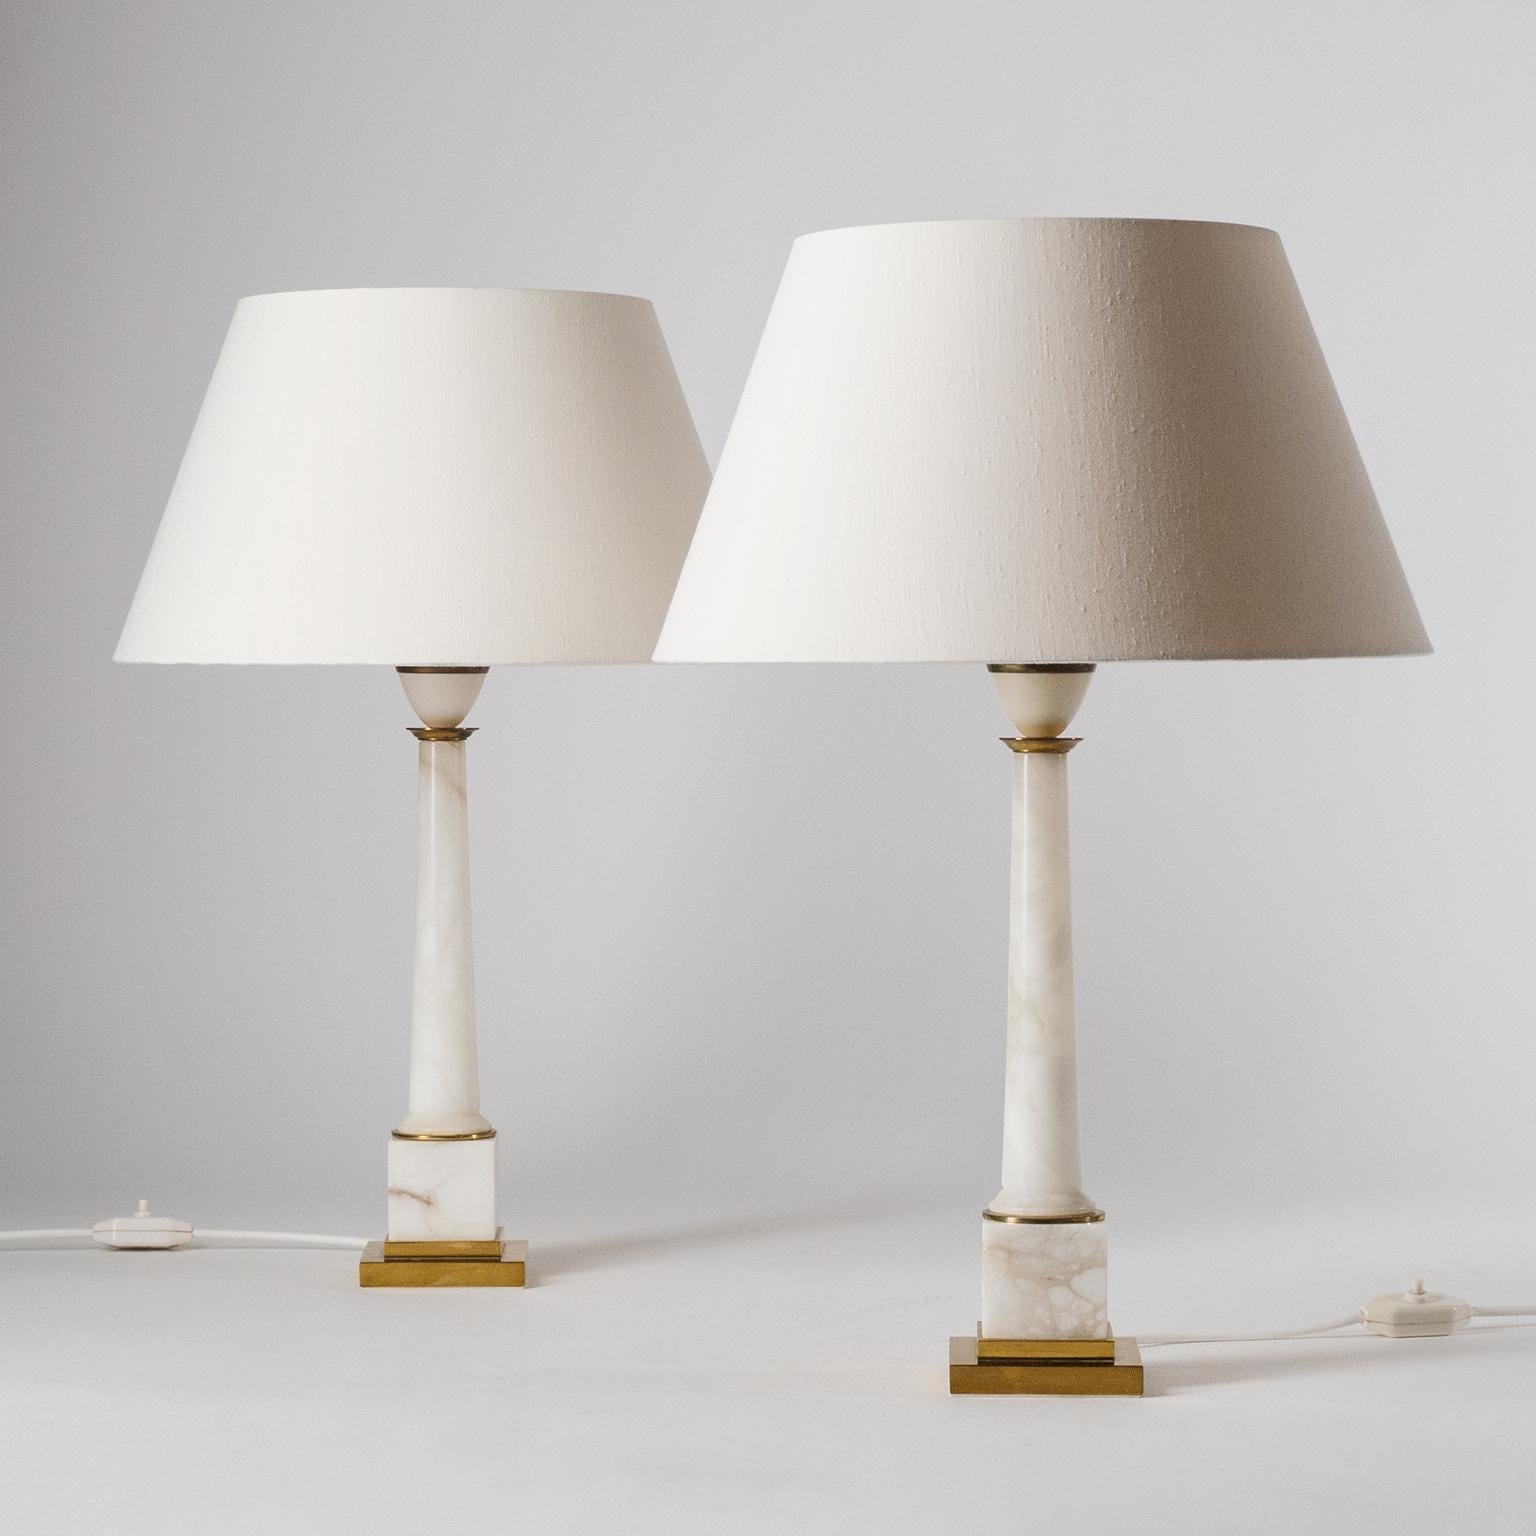 Fine pair of marble column table lamps from the 1960-1970s. Elegant design (Neo-Classical with a Modernist touch) with brass details and original silk shades. Very good original condition with some patina on the brass parts. One original brass E27